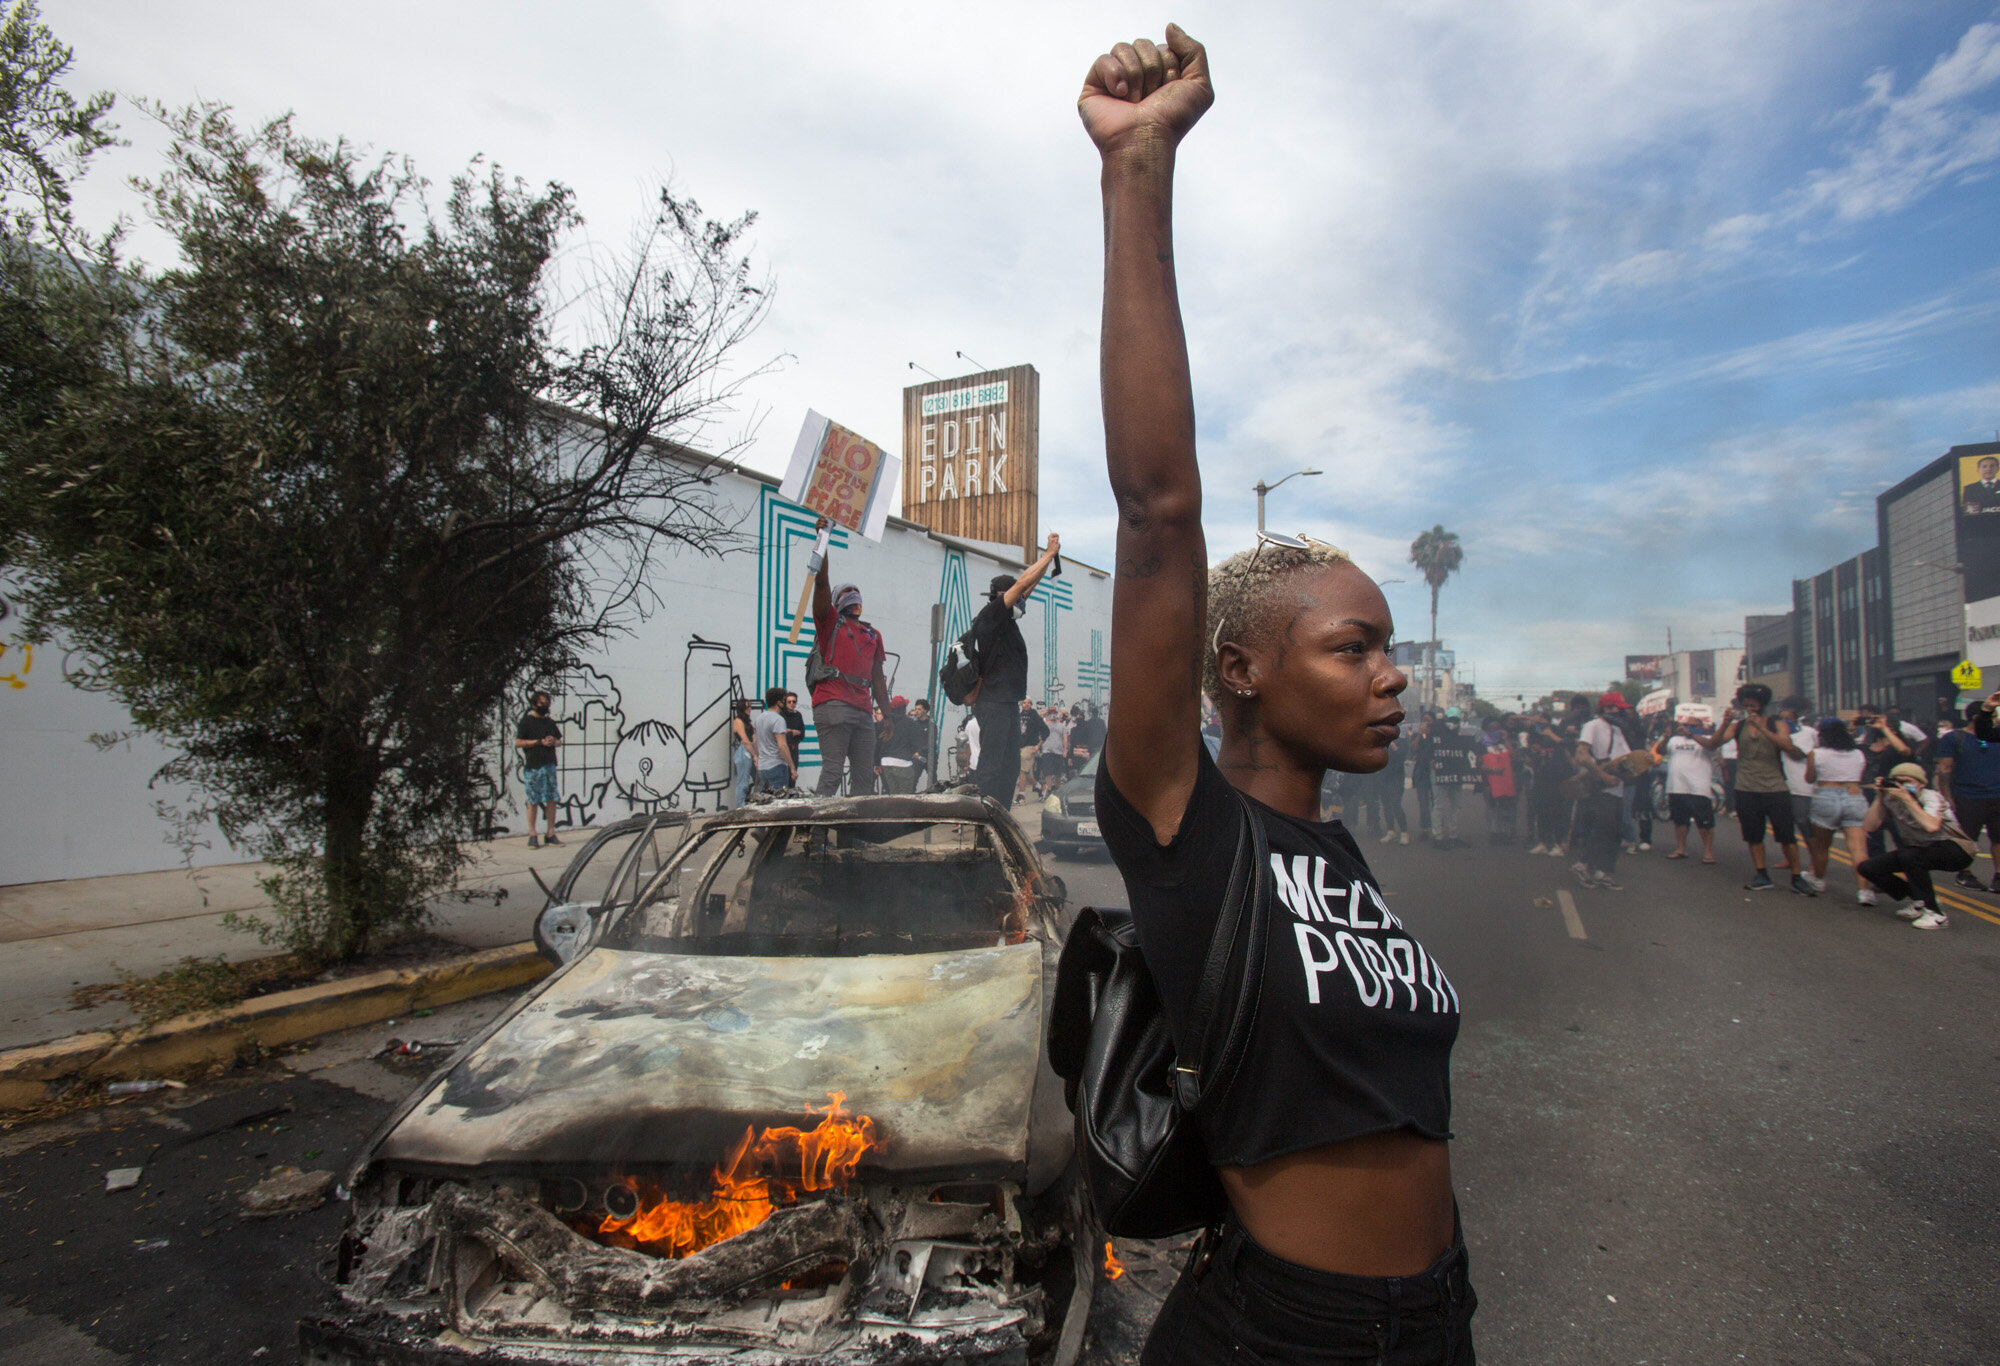  A protester poses for photos next to a burning police vehicle in Los Angeles on May 30, 2020, during a demonstration over the death of George Floyd, a Black man who died in Minneapolis after a white police officer pressed a knee into his neck for se